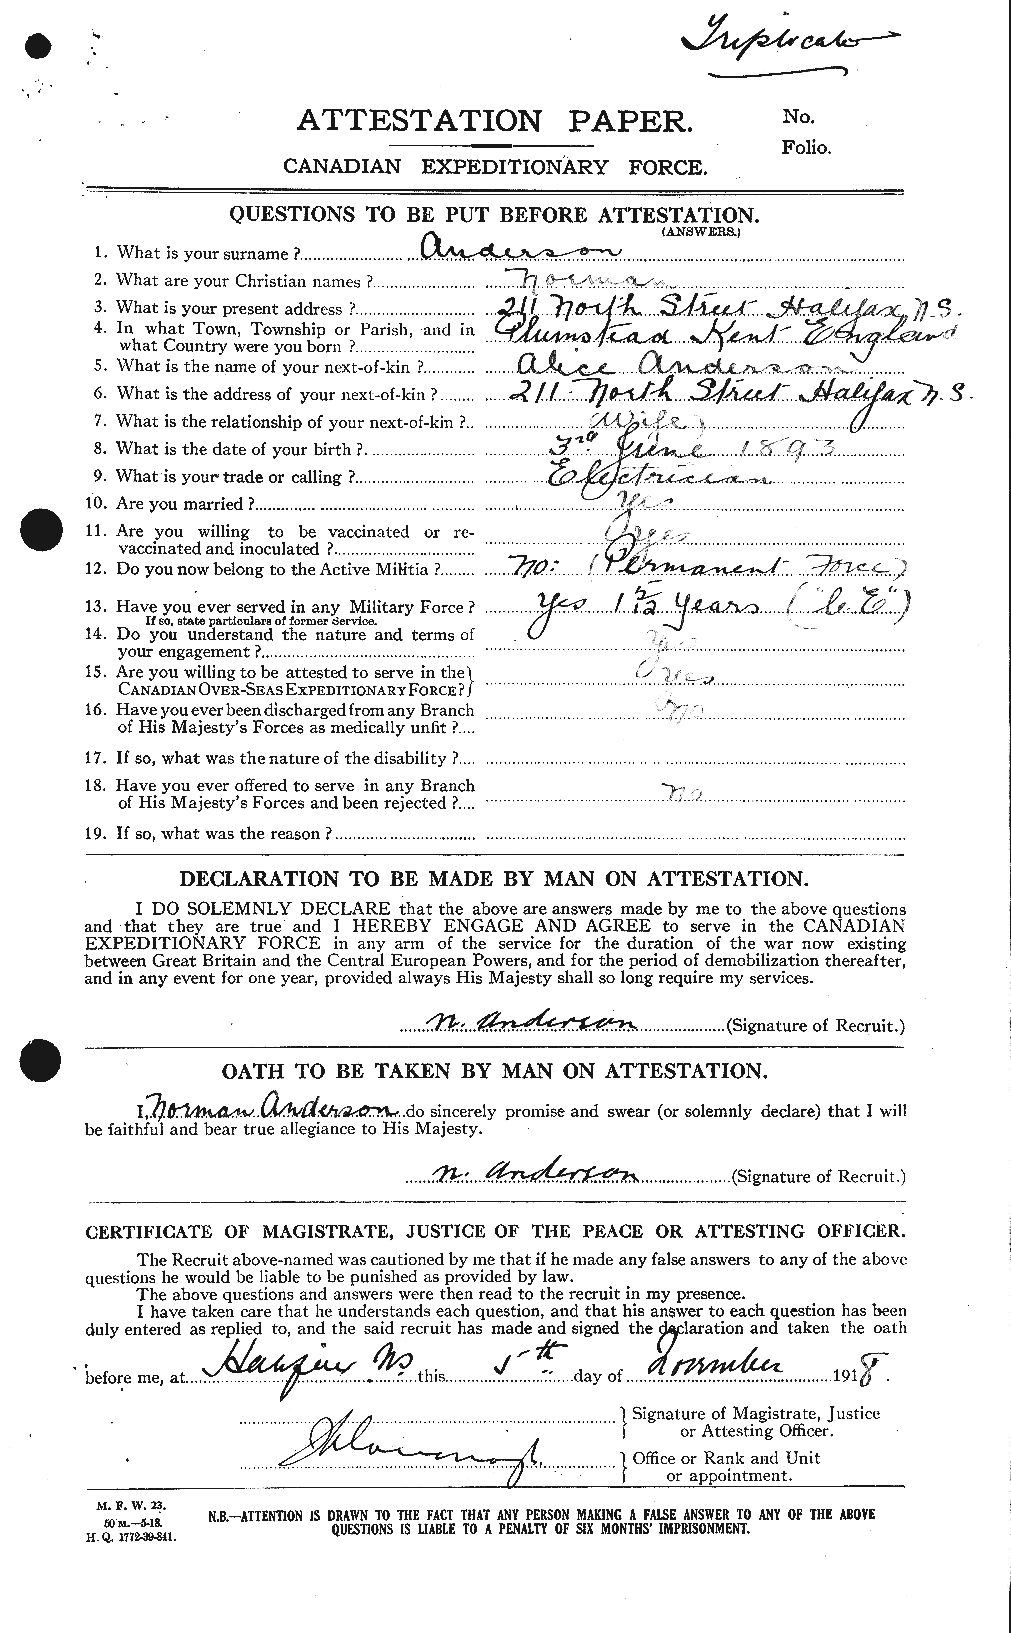 Personnel Records of the First World War - CEF 207414a